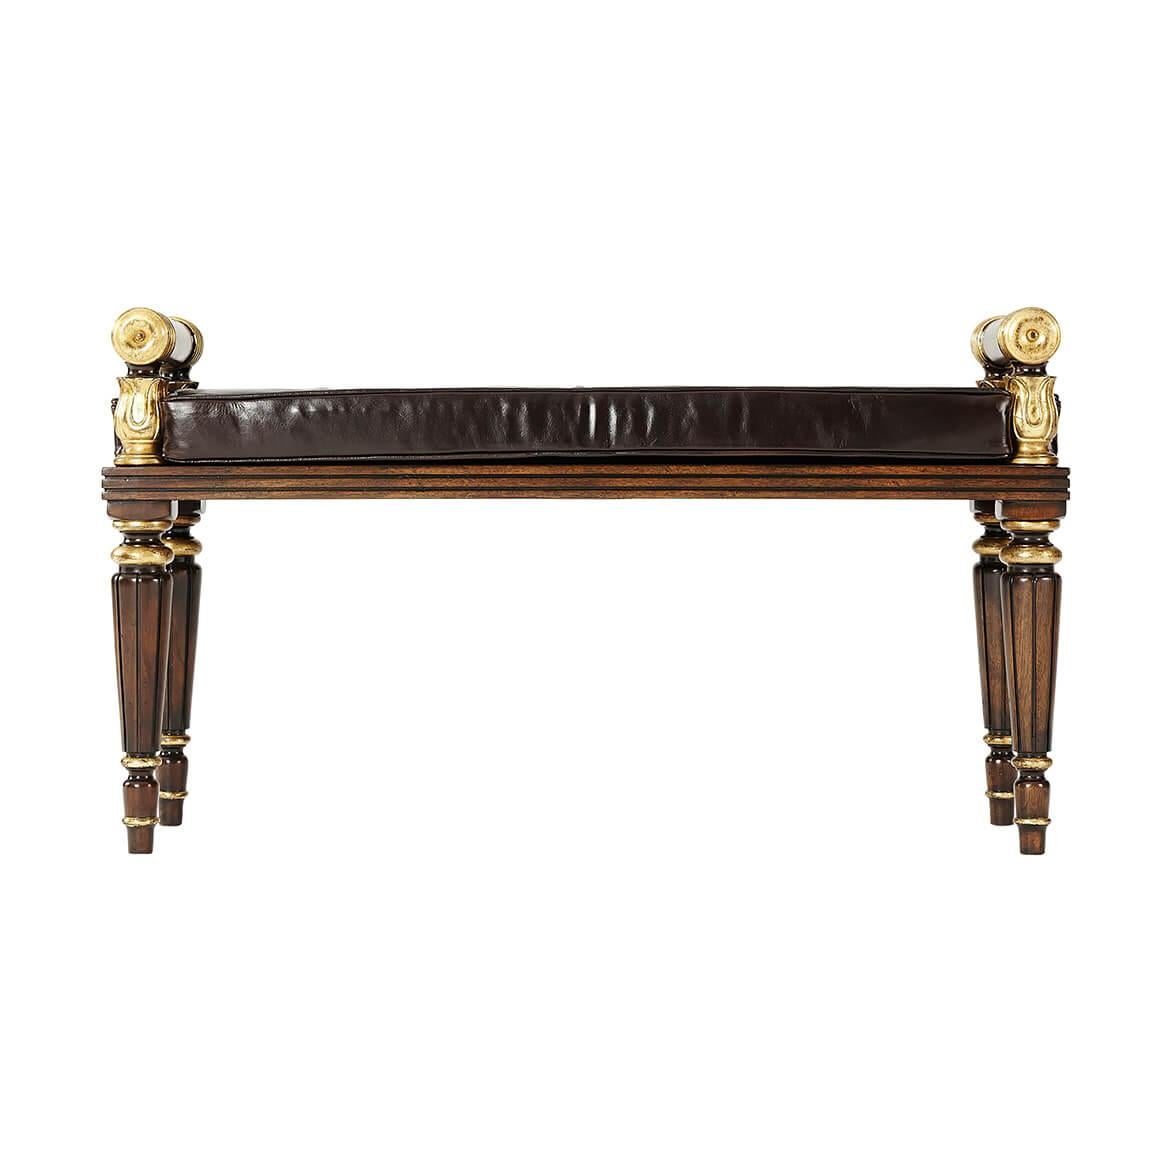 A pair of carved mahogany and parcel-gilt hall bench, the reeded solid seat with lapette carved and scroll end supports, loose button upholstered seat cushion, on turned fluted and tapering legs. In the manner of George Bullock. 

Dimensions: 42